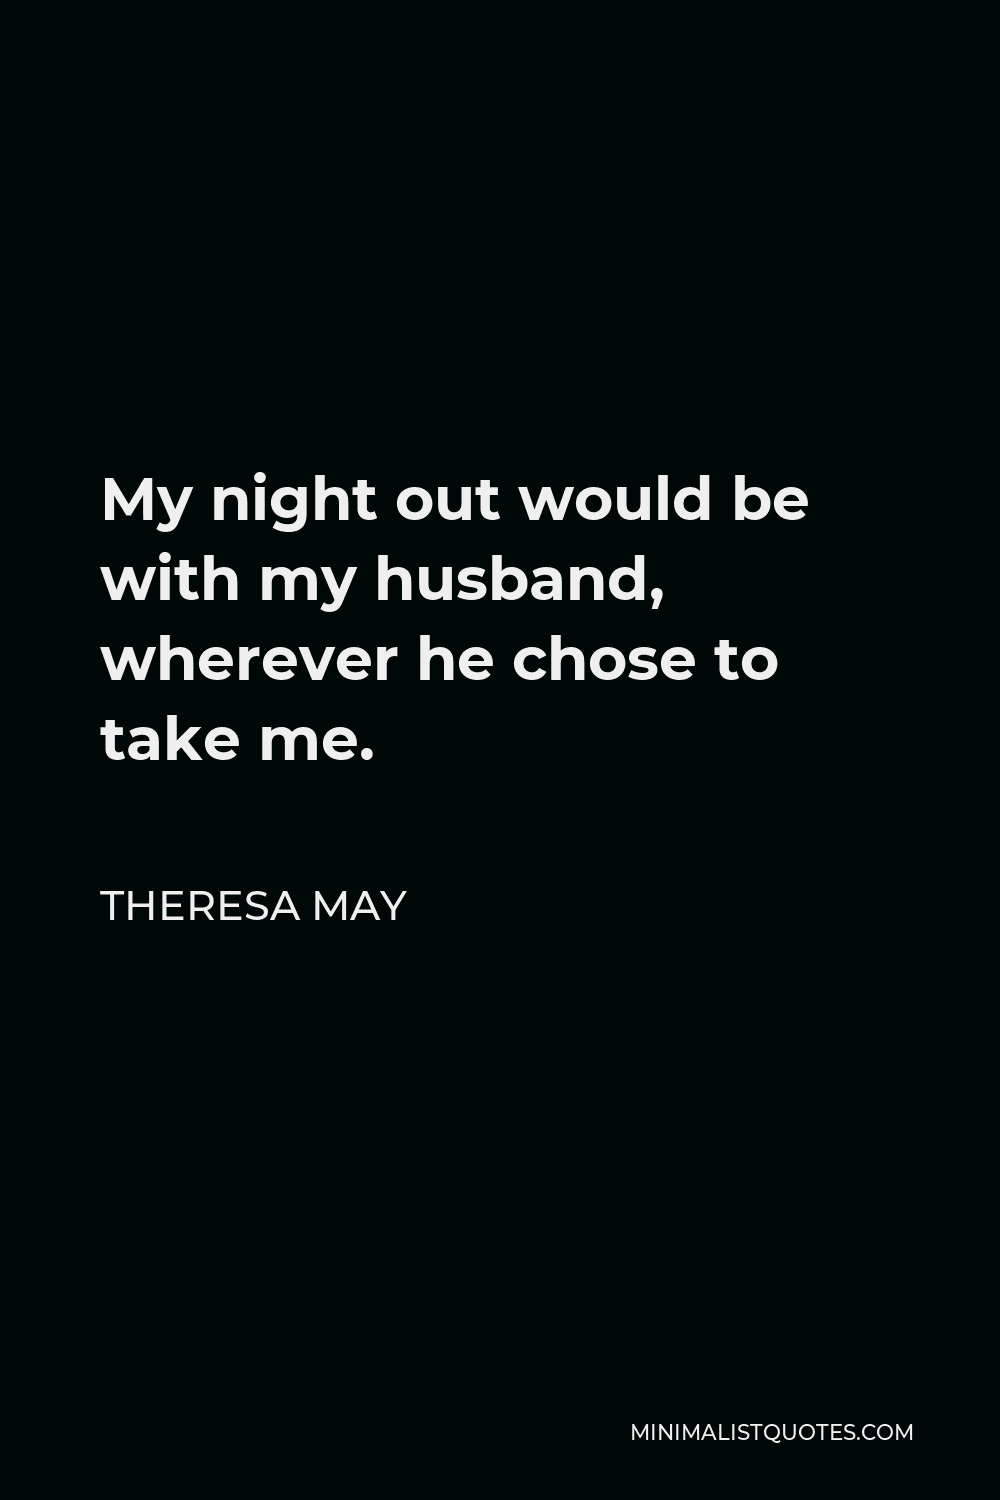 Theresa May Quote - My night out would be with my husband, wherever he chose to take me.